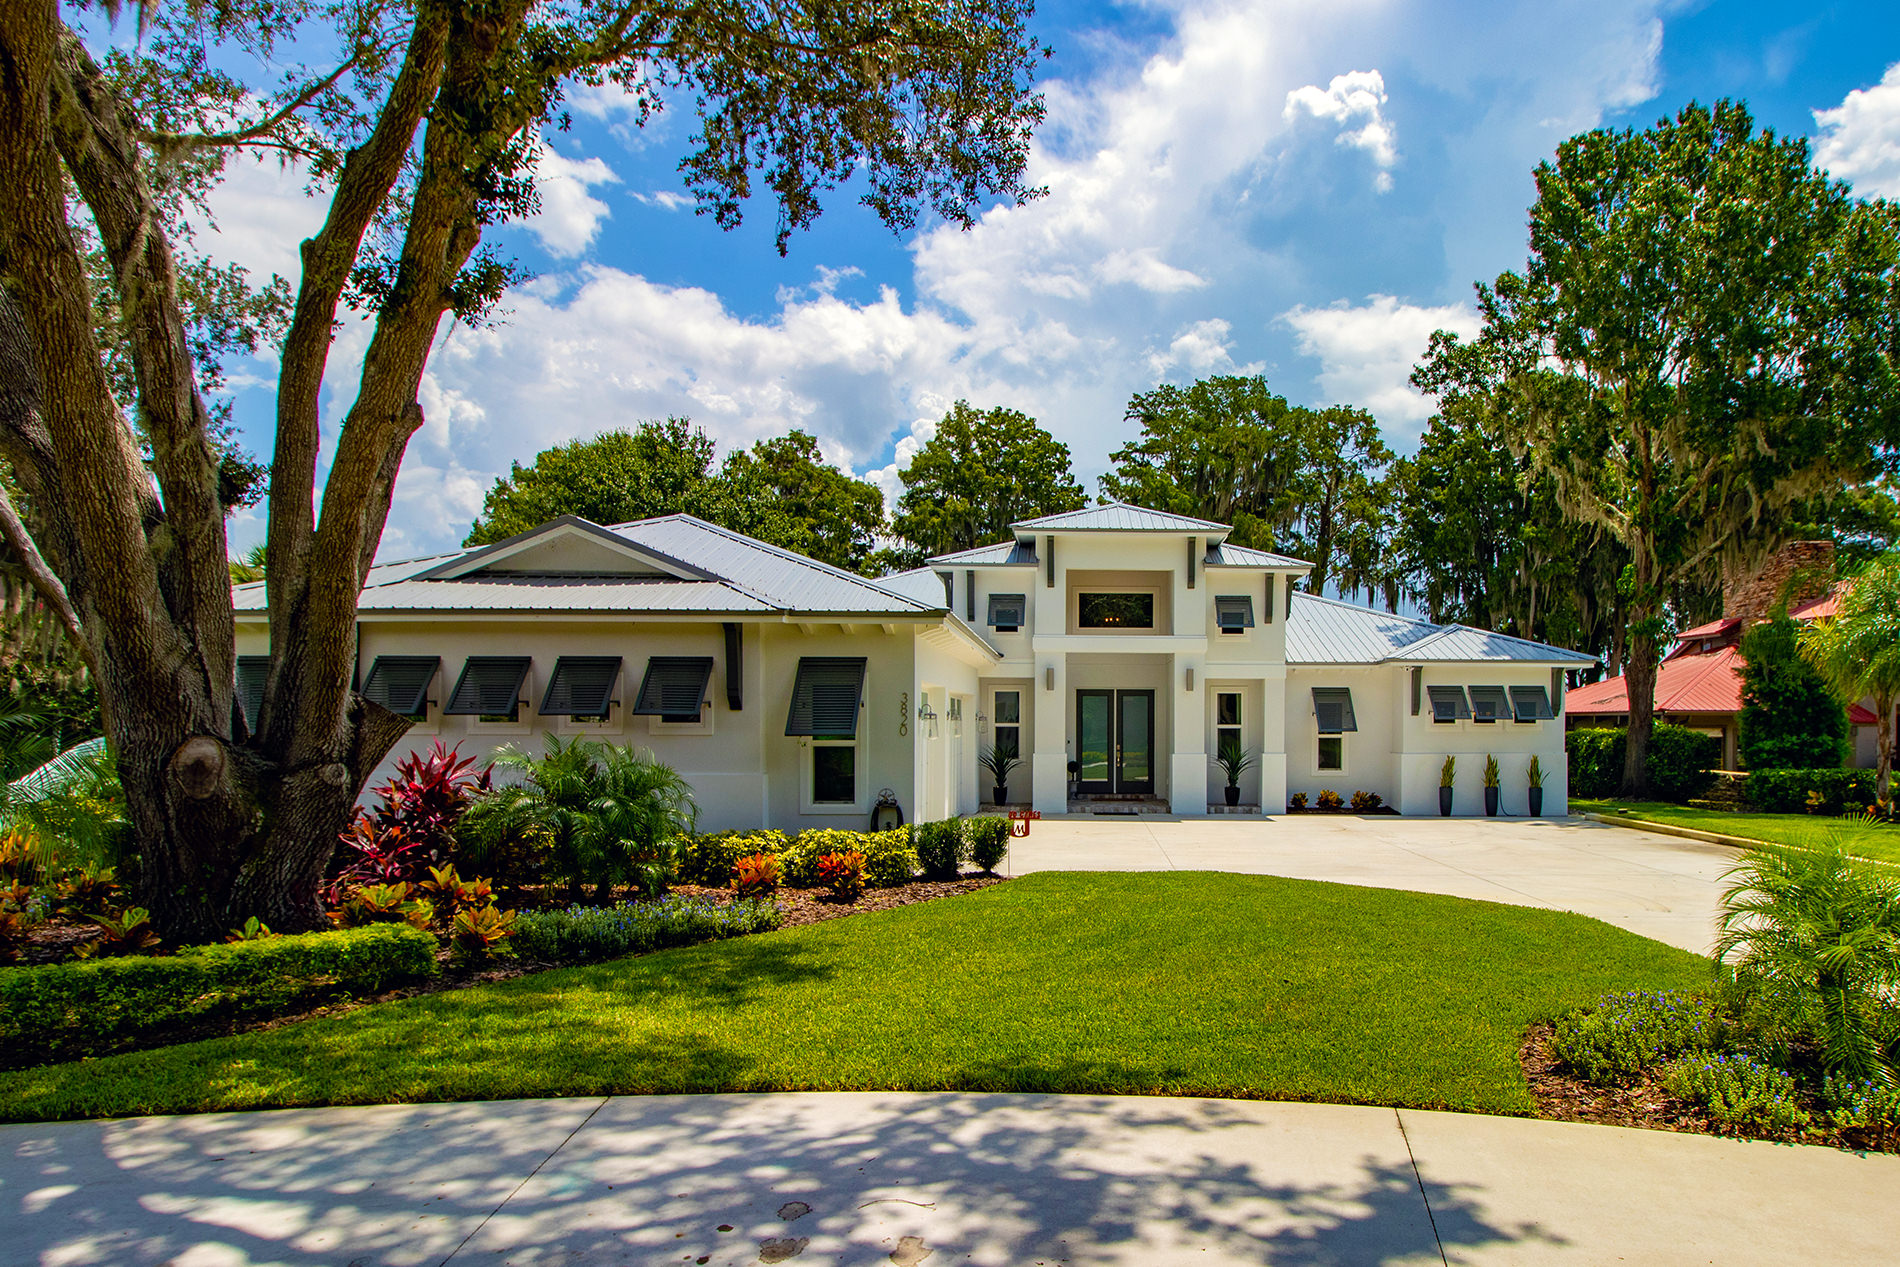 Wesley Chapel Homes for Sale